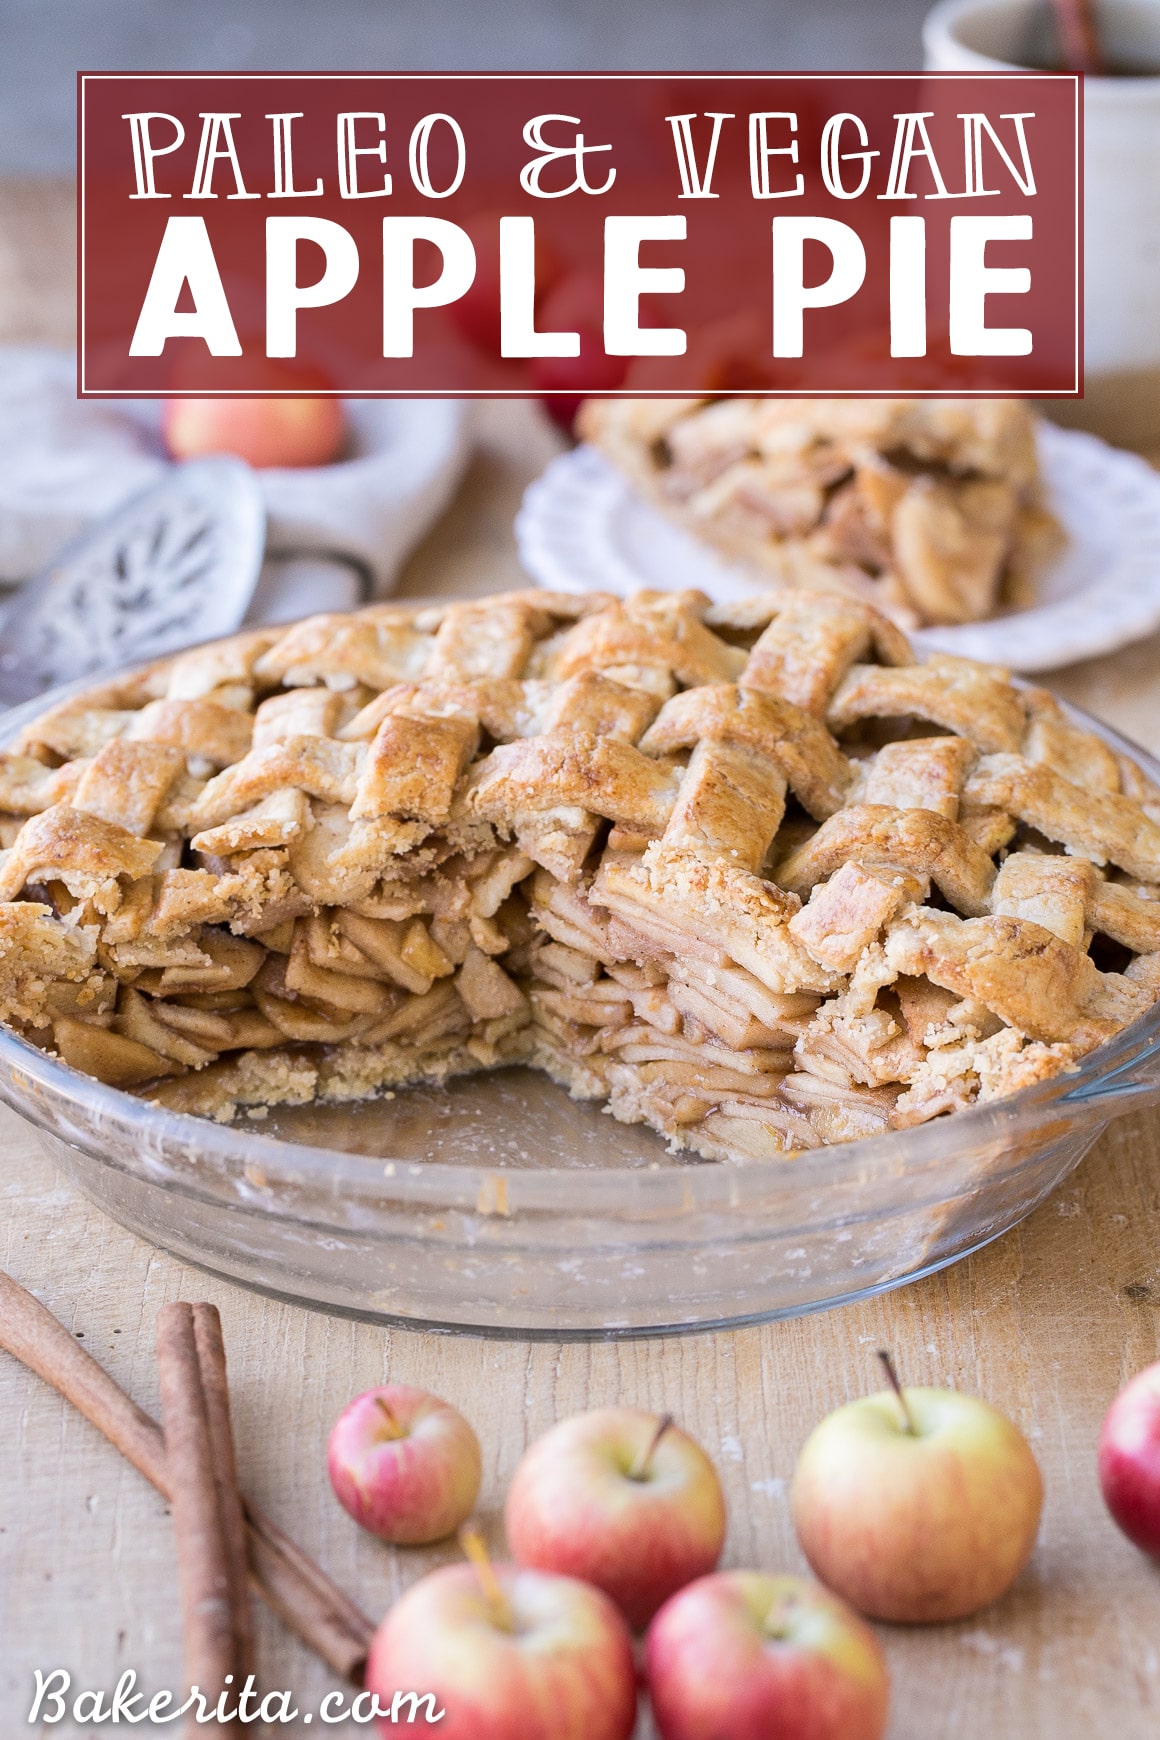 This Paleo Apple Pie has a flaky gluten-free lattice crust with a delicious spiced apple filling! This healthier apple pie recipe is the perfect paleo Thanksgiving dessert. This recipe has a vegan option.